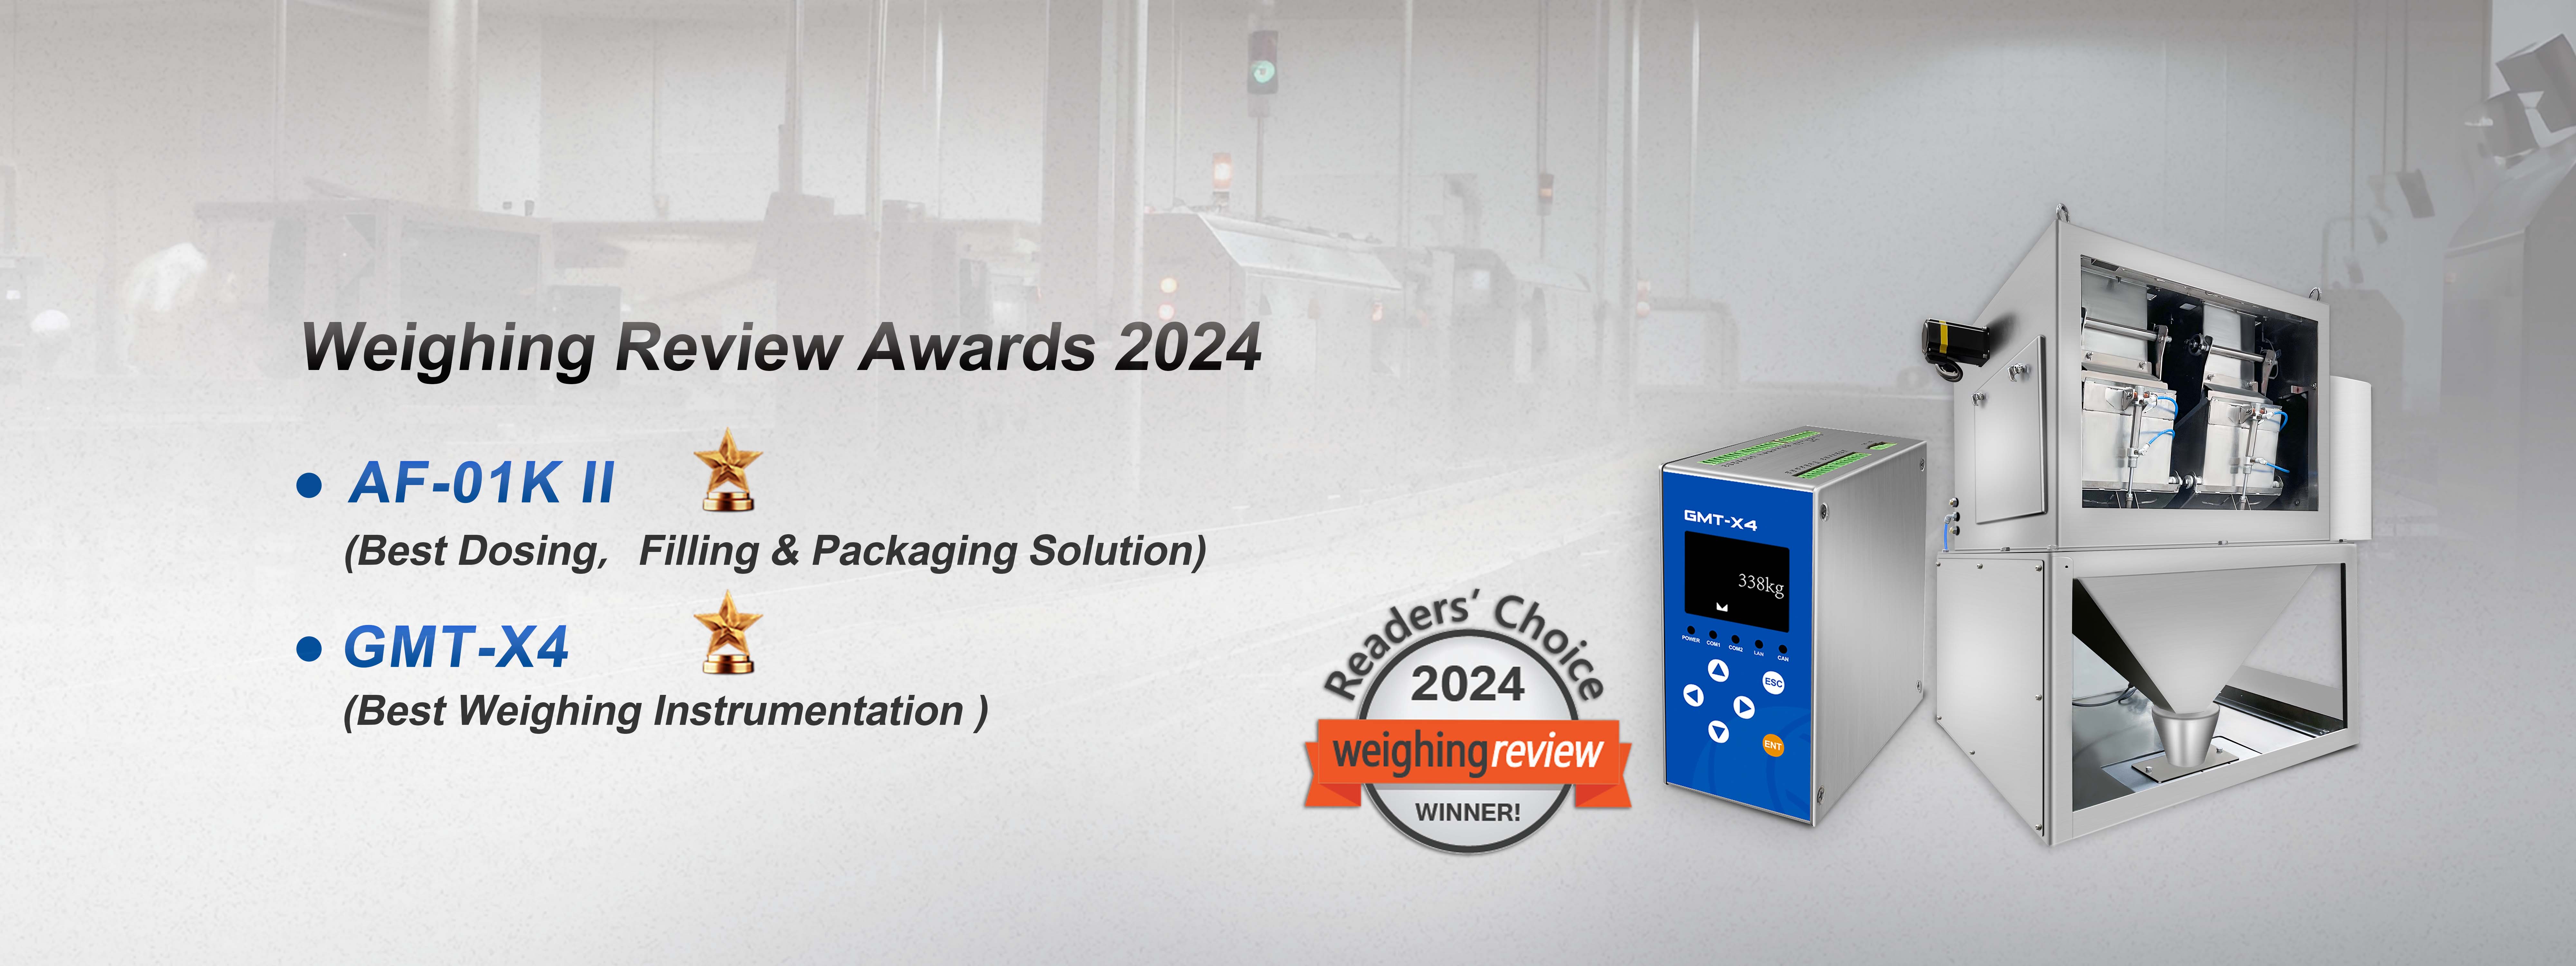 General Measure Won On Weighing Review Awards 2024